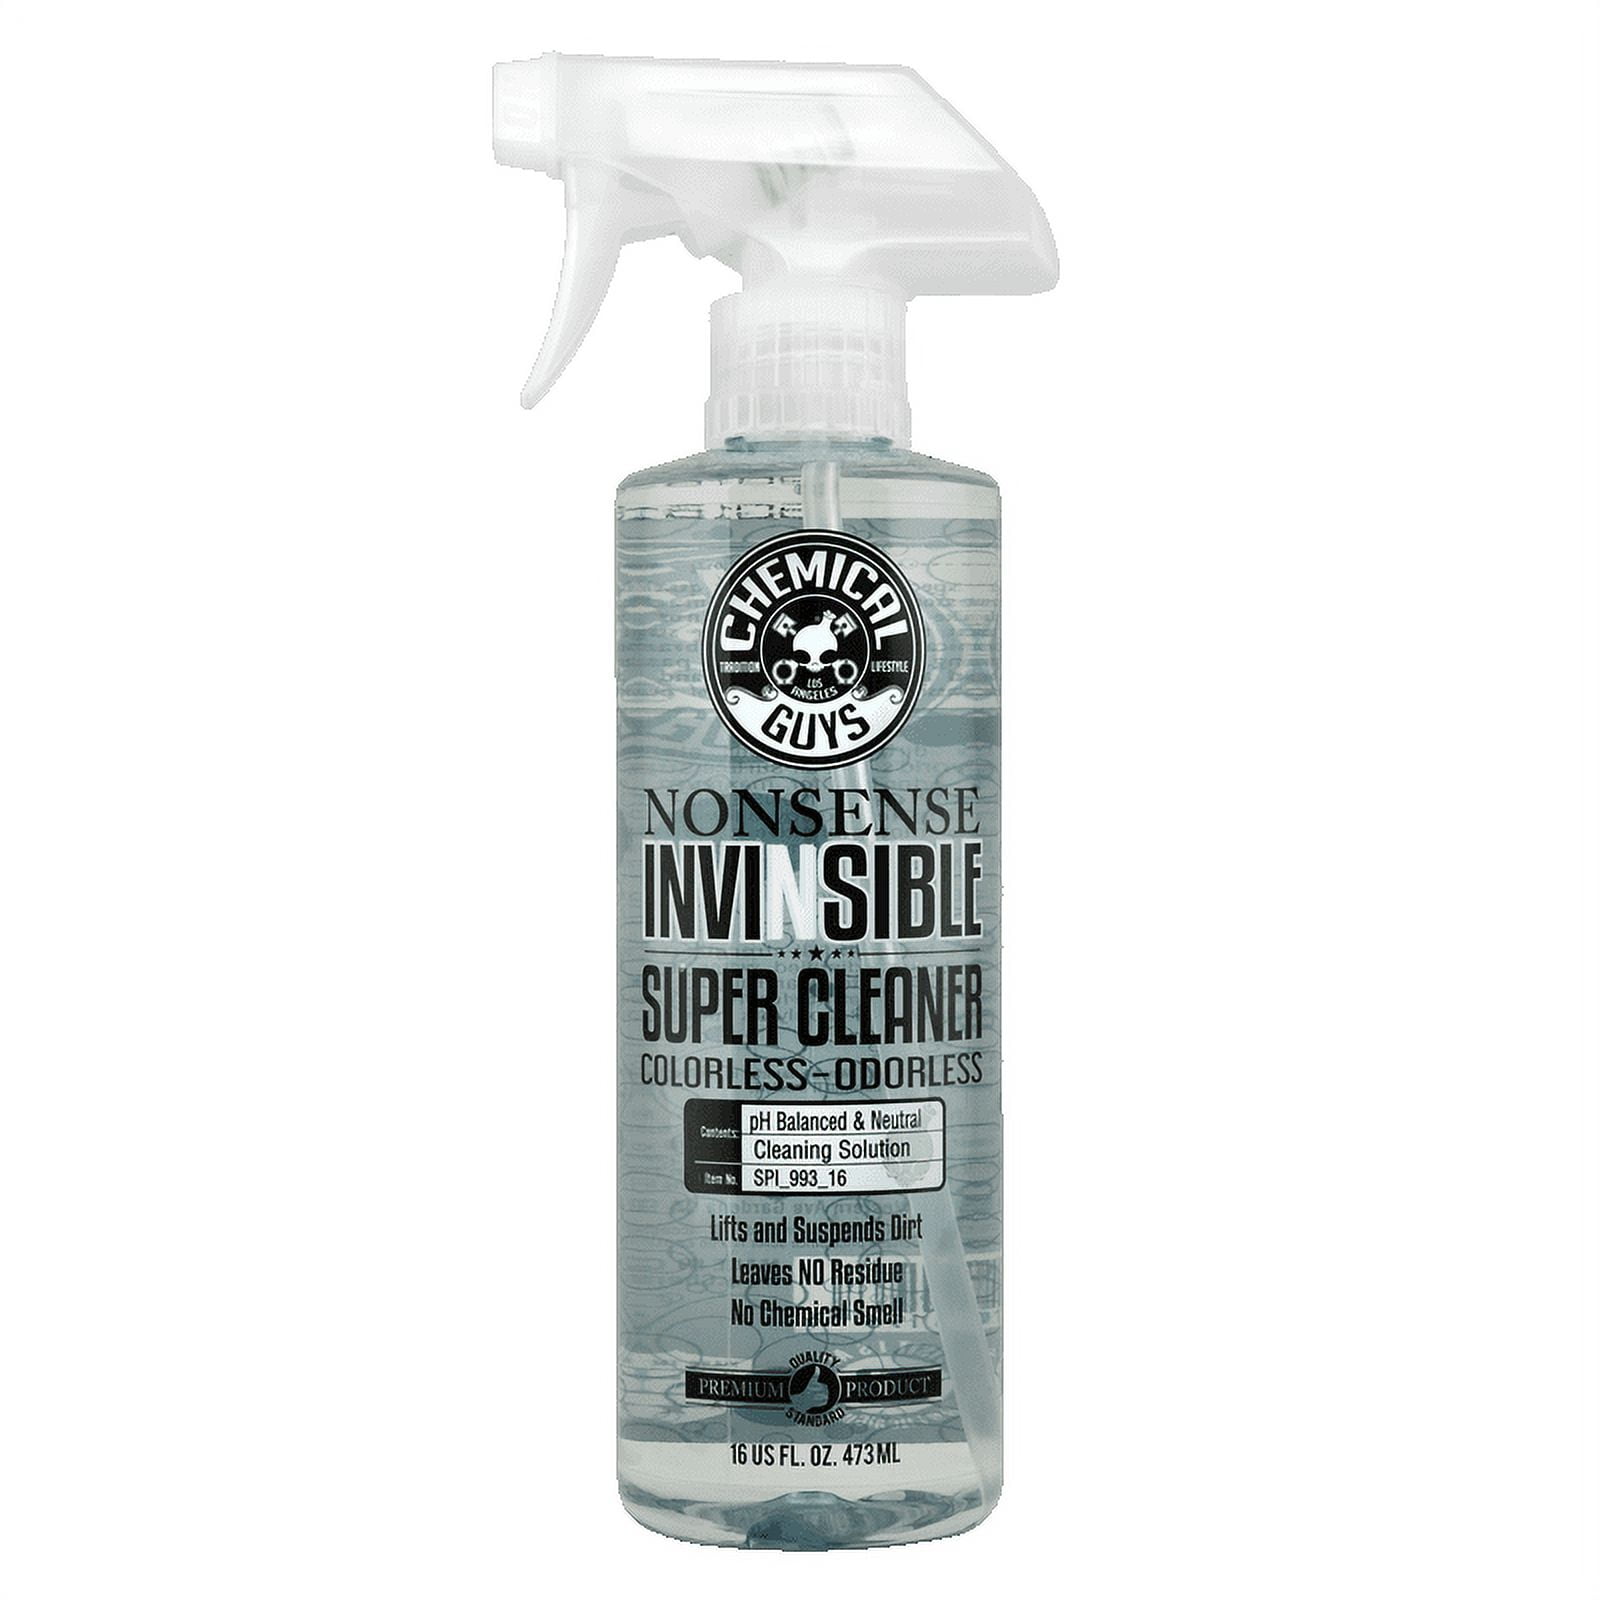 911487-4 Superclean Cleaner/Degreaser, 30 gal. Drum, Unscented Liquid,  Ready to Use, 1 EA